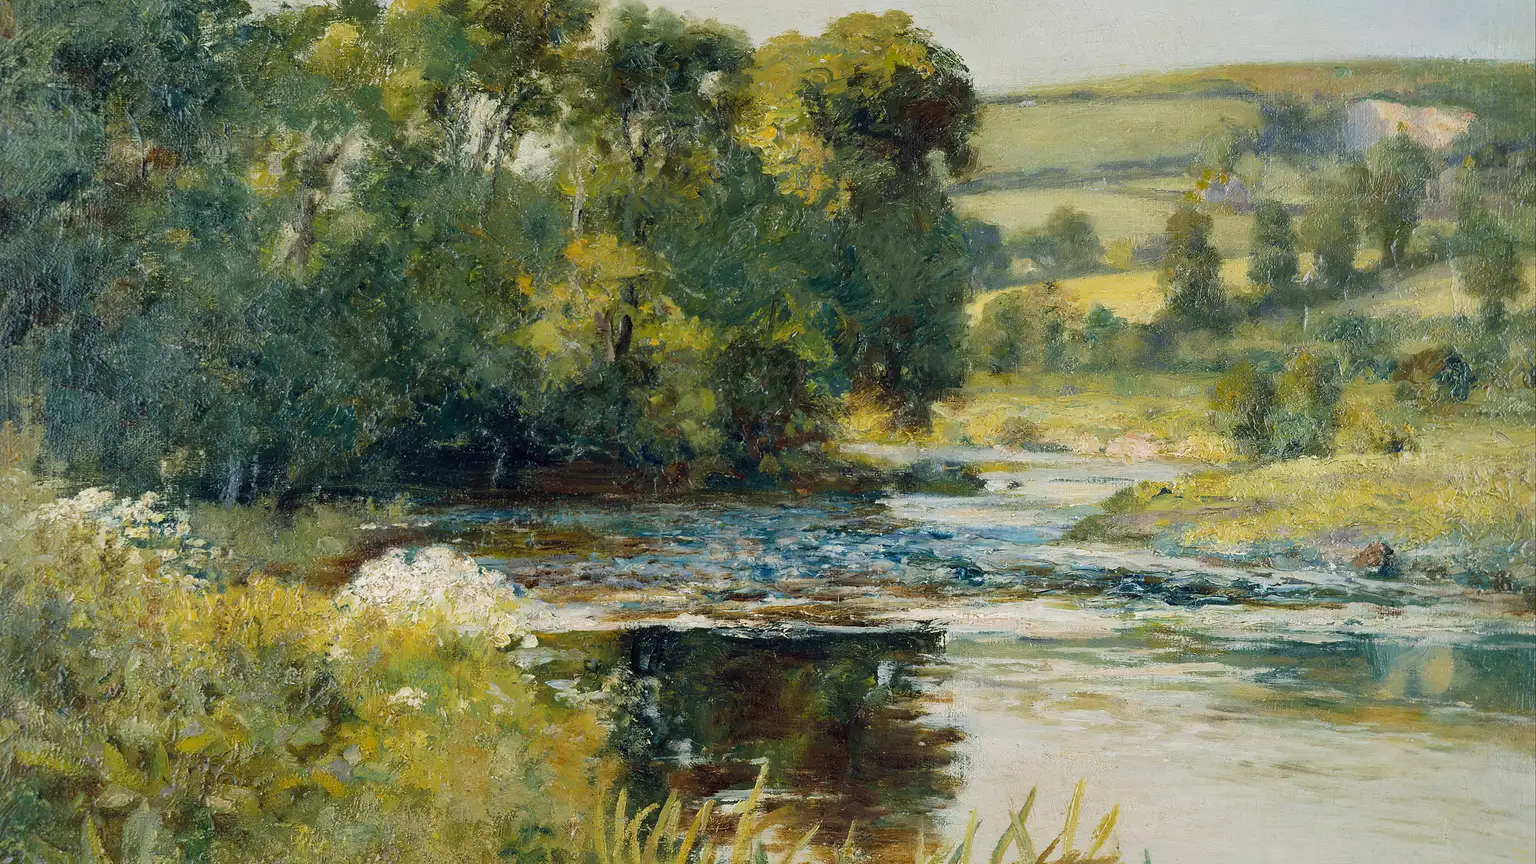 Landscape painting by Edward Mitchell Bannister